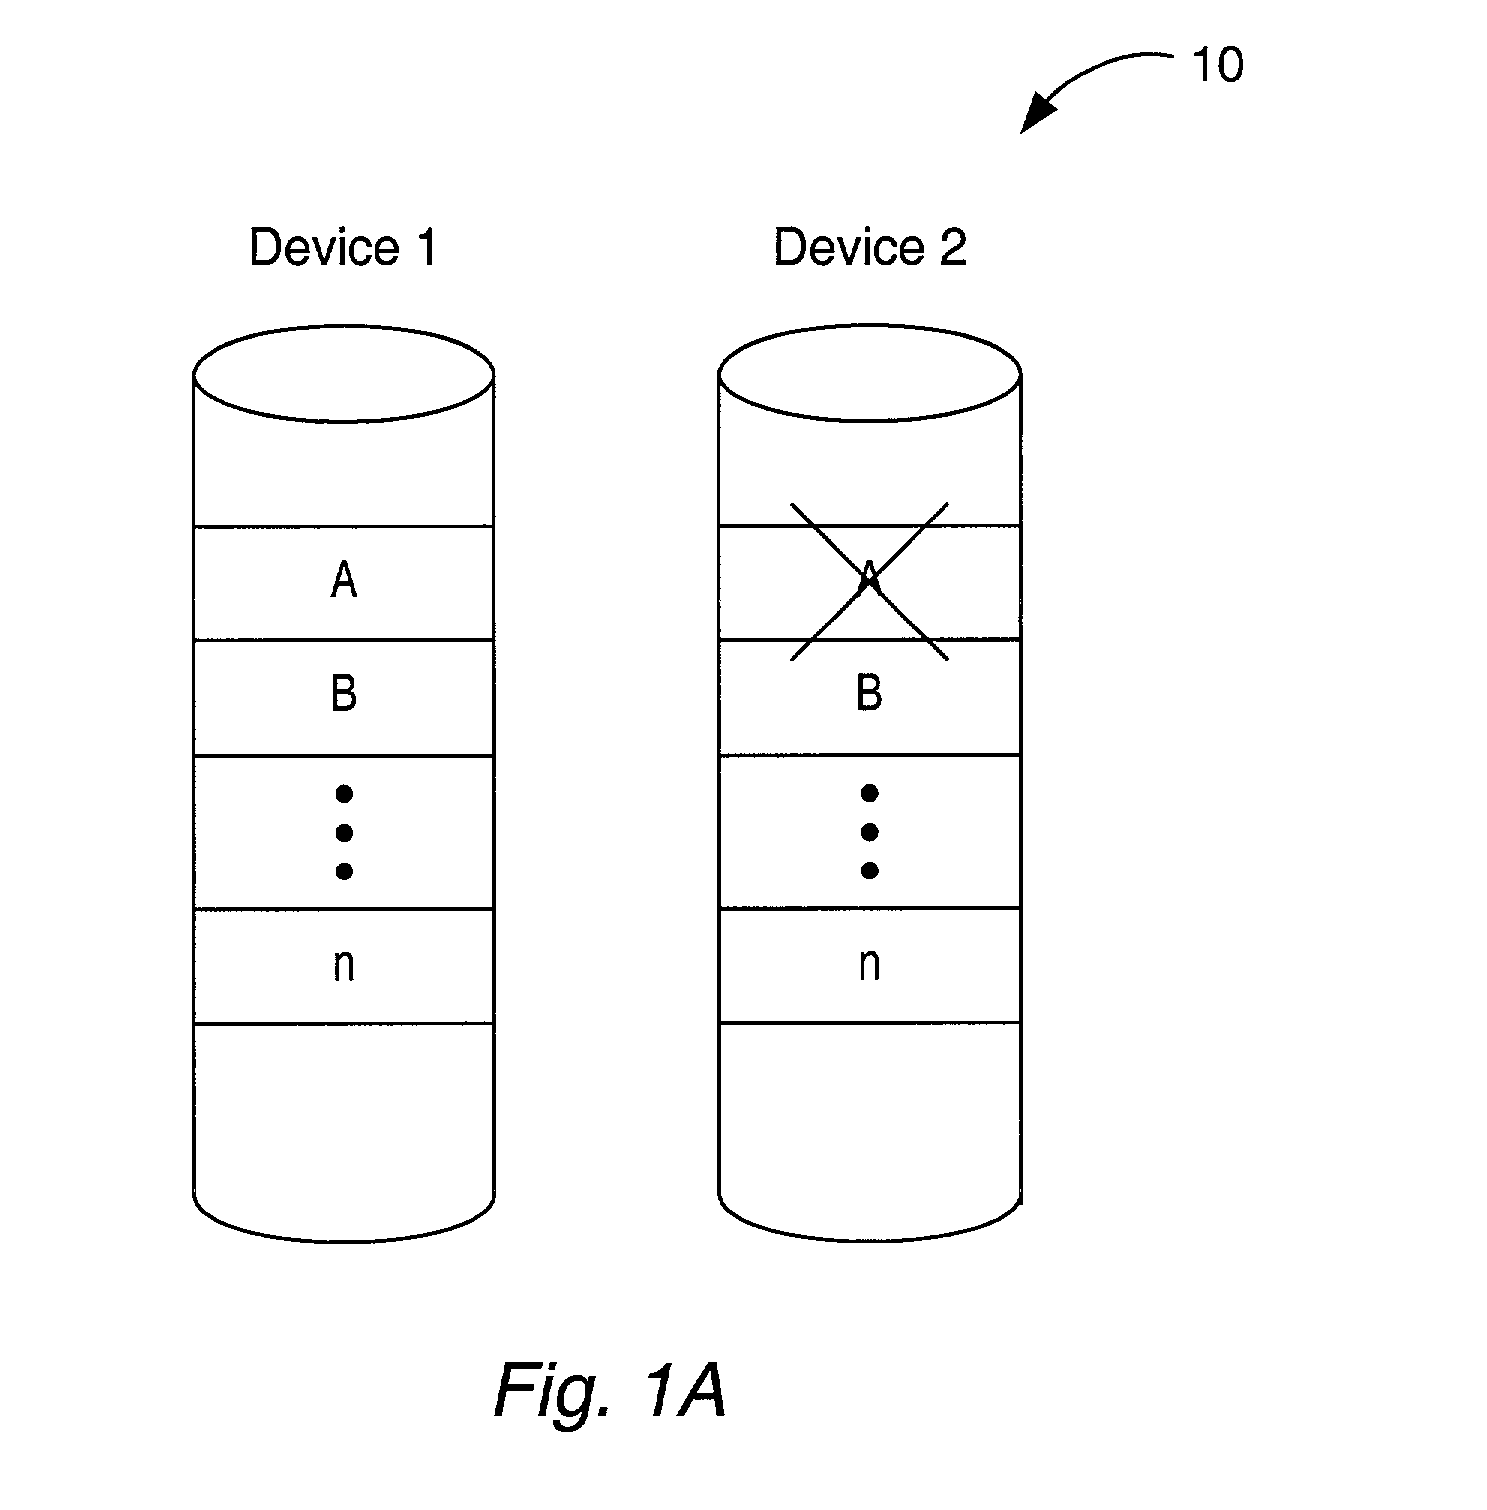 Storage array employing scrubbing operations at the disk-controller level